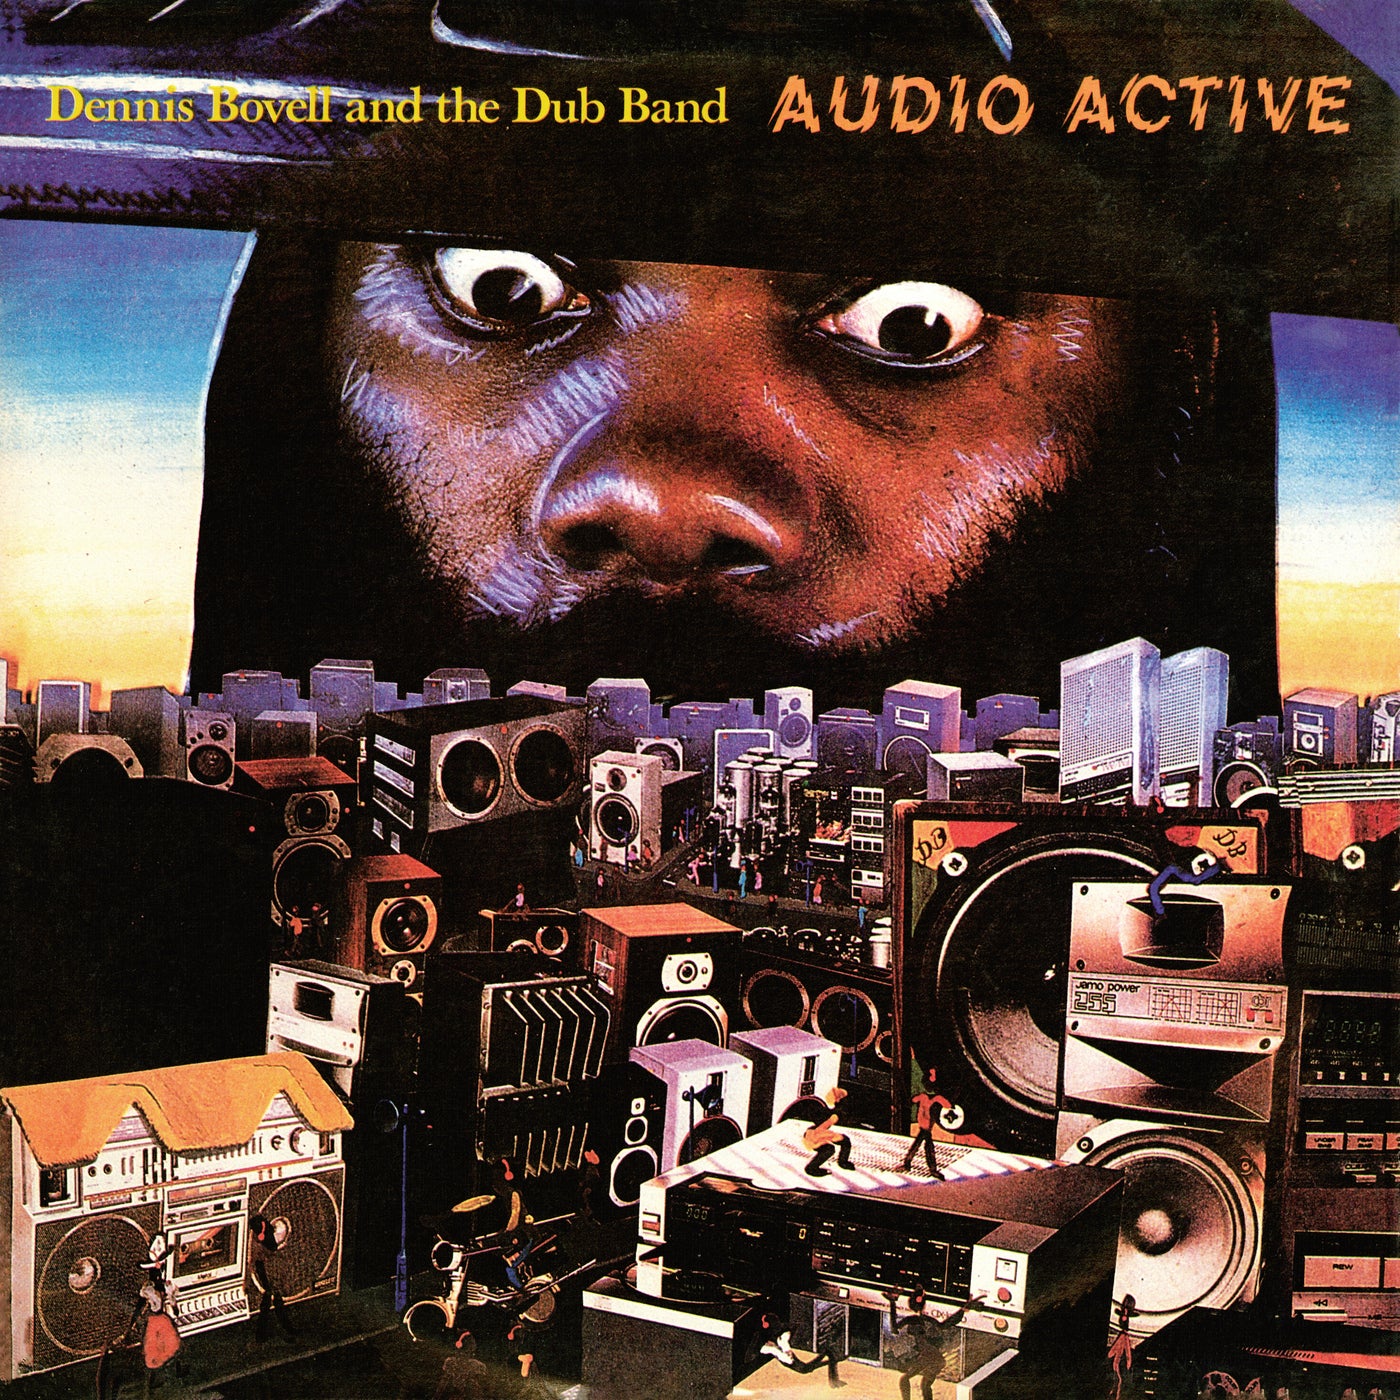 Ah Who Seh? Go Deh! by Dennis Bovell and The 4th Street Orchestra